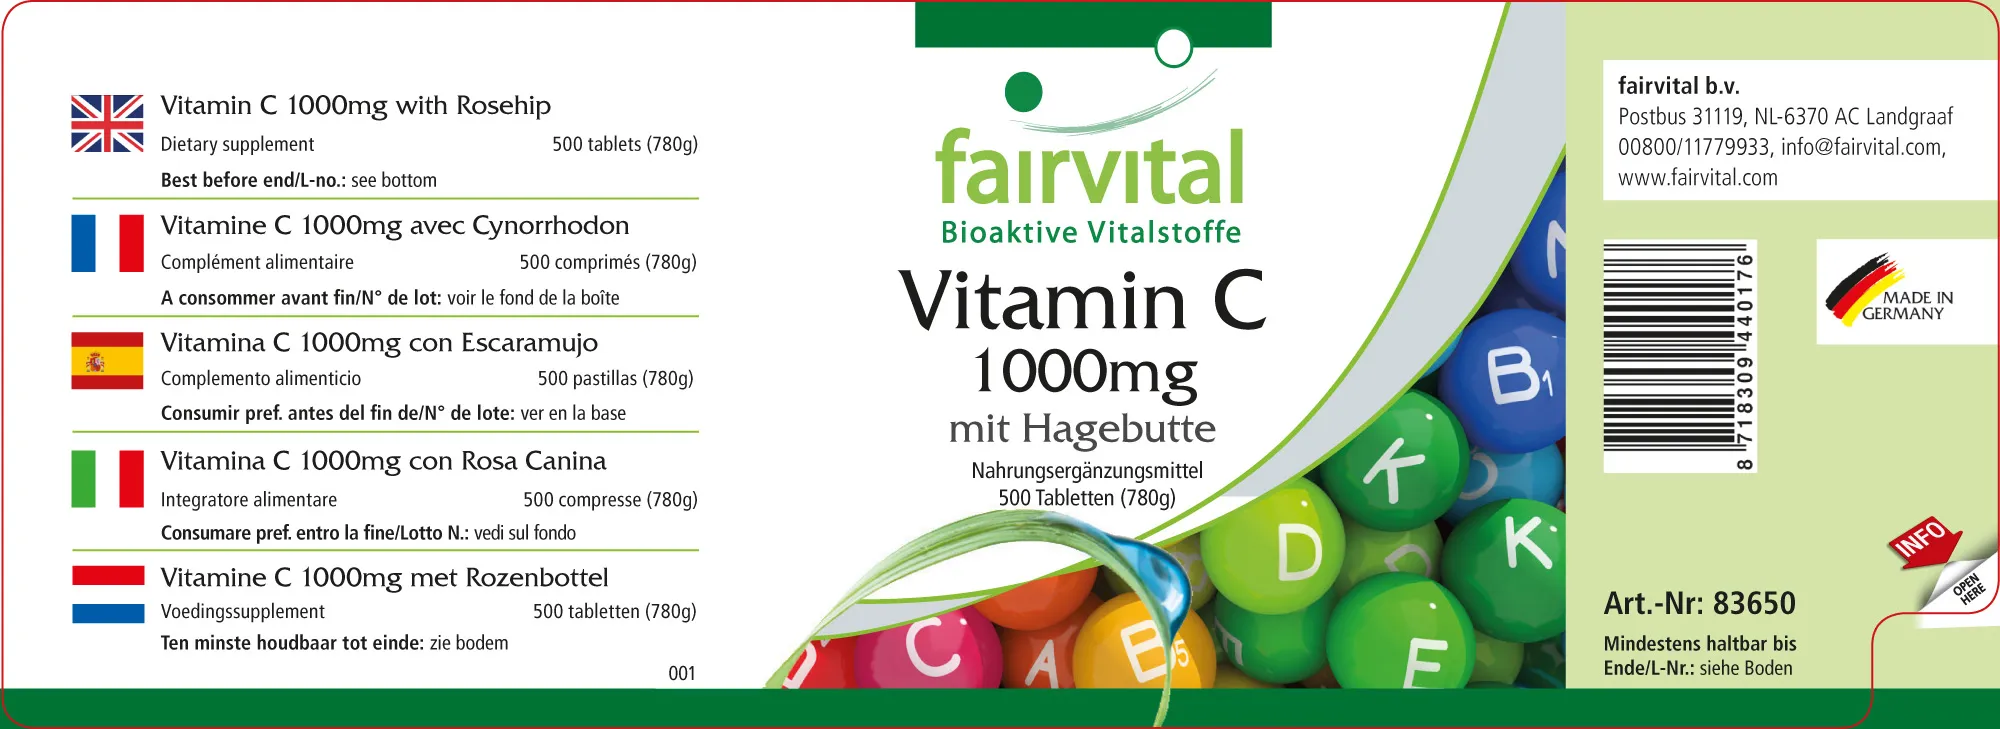 Vitamin C 1000mg with rosehip - 500 tablets